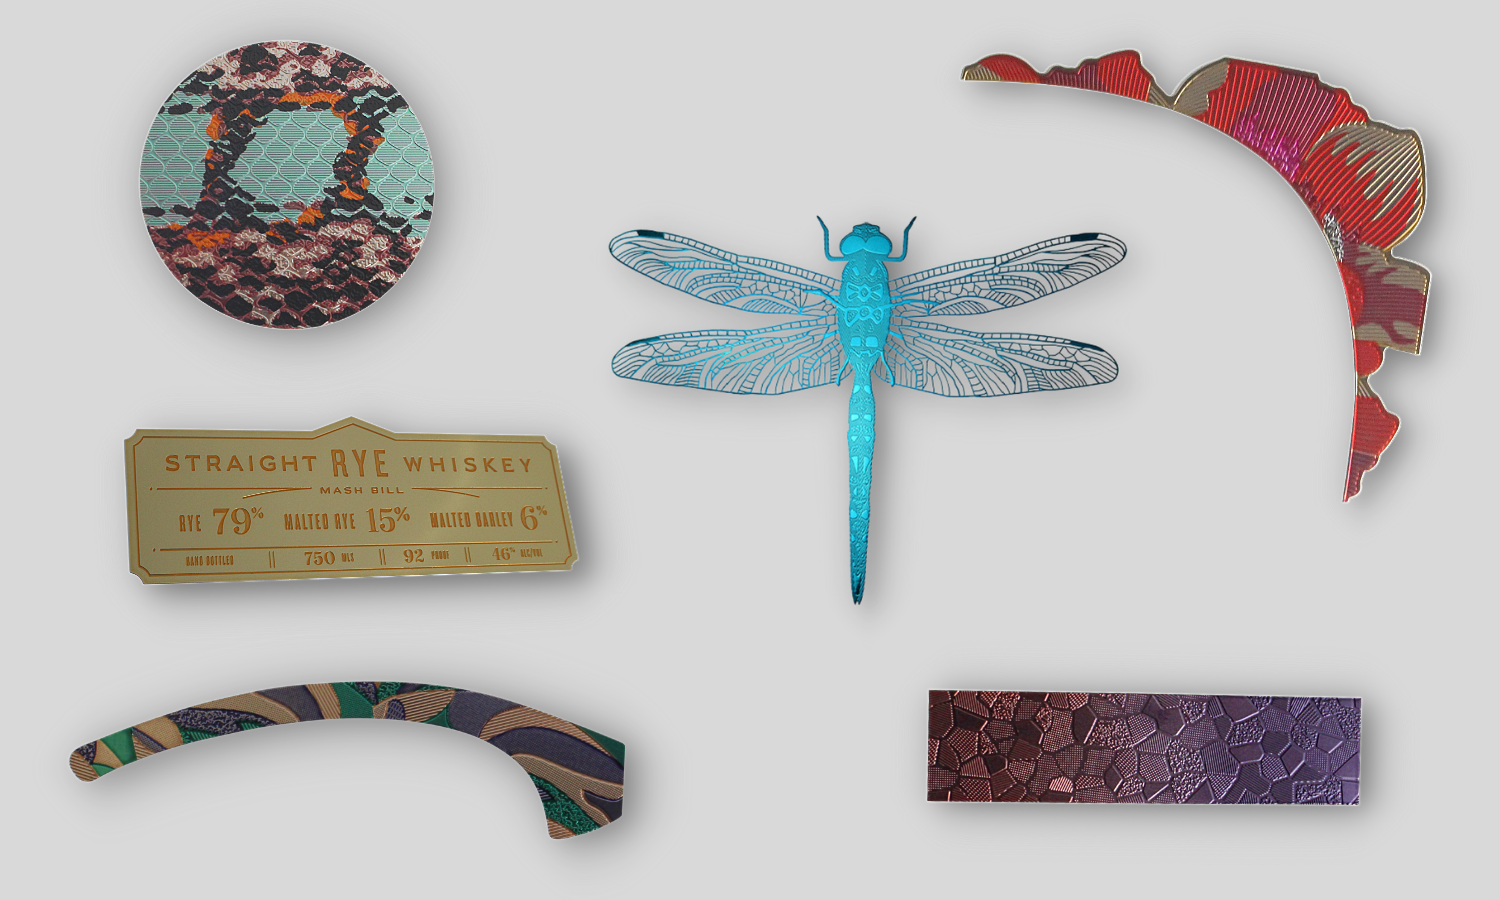 Collage of low profile electroform parts. Circular snake skin texture trim piece with sea foam green, rose gold, and brown shades. Whistle Pig whiskey label, gold with bronze copy. Arced eyebrow decorative trim piece with various textures on rose gold, green, and blue shades. Metallic blue dragonfly with microscopic openings. Faded pink to purple rectangle accent piece. Arced eyebrow corner decorative trim piece with red, purple, pink, and silver tones.